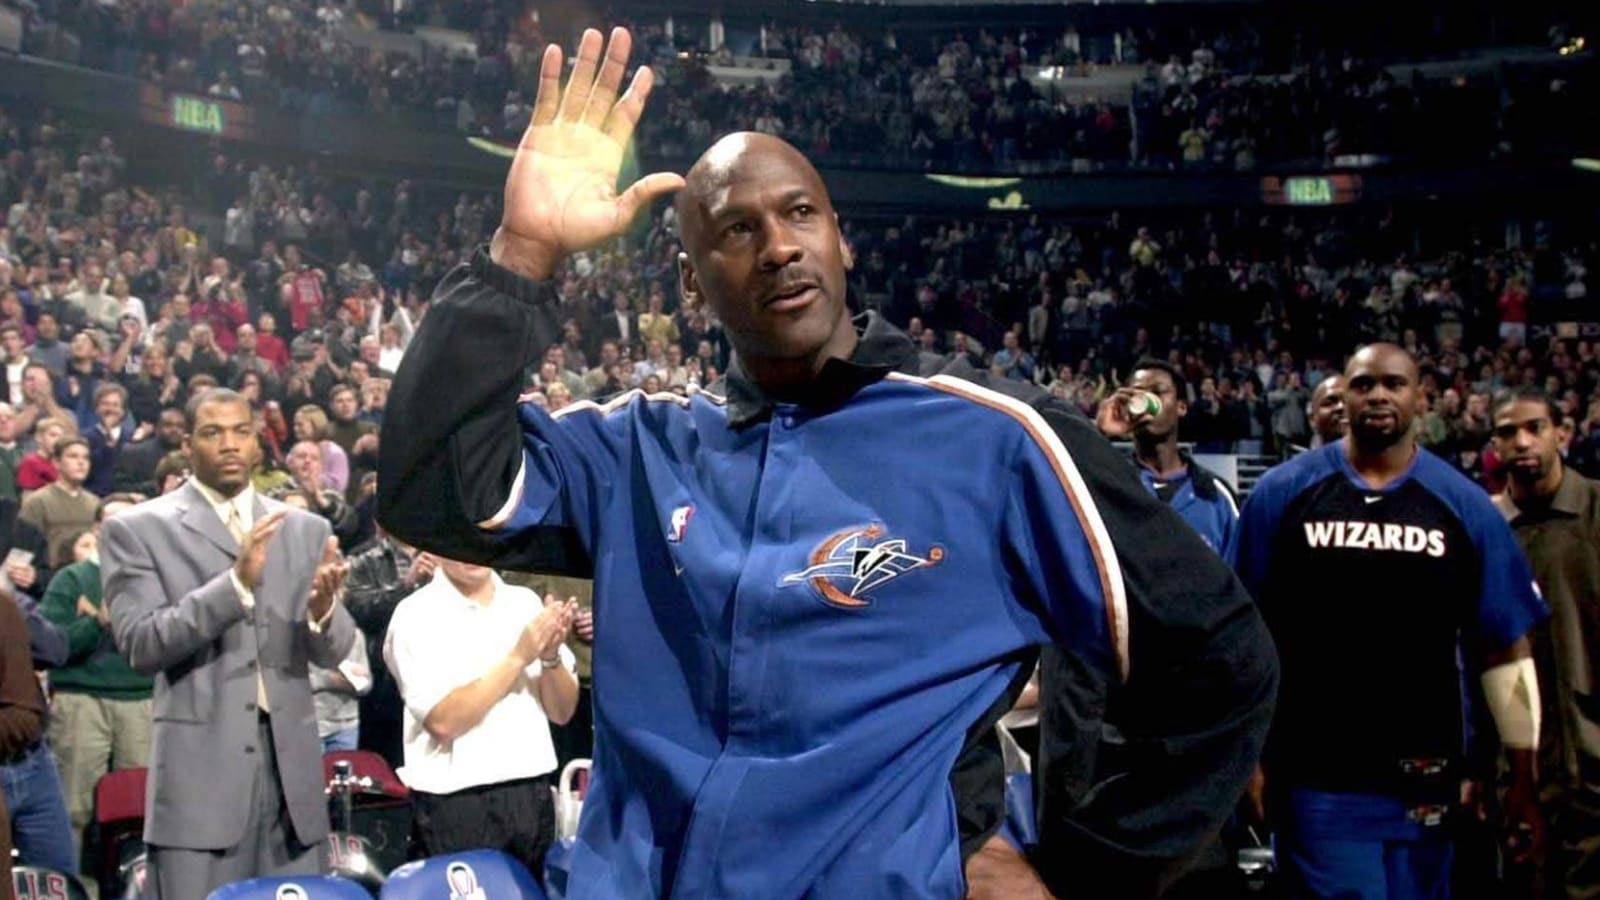 Michael Jordan's Wizards jersey in final game fetches $570K